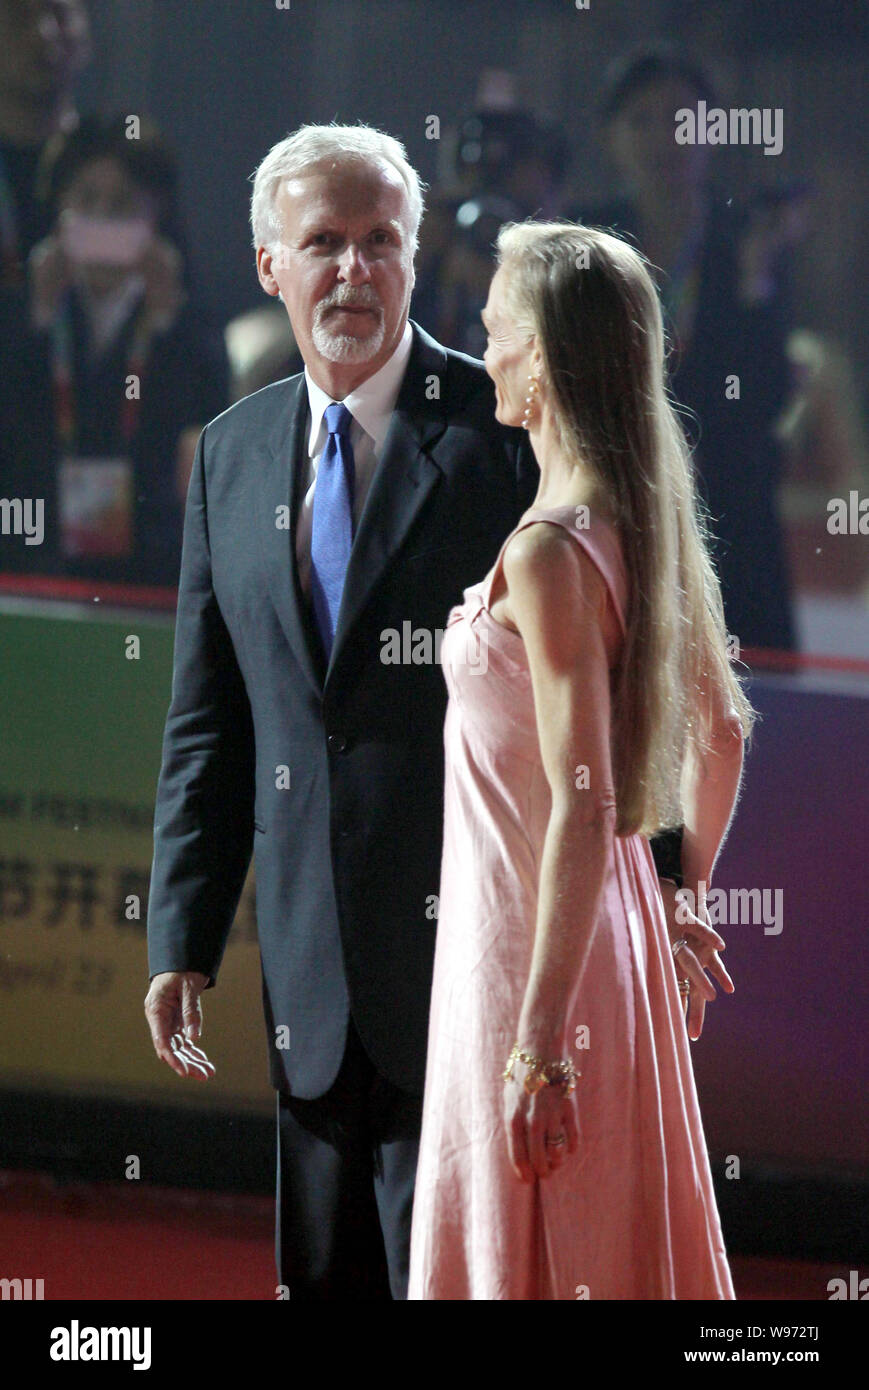 Canadian film director and producer James Cameron and his wife Suzy Amis are pictured on the red carpet ahead of the opening ceremony for the 2nd Beij Stock Photo